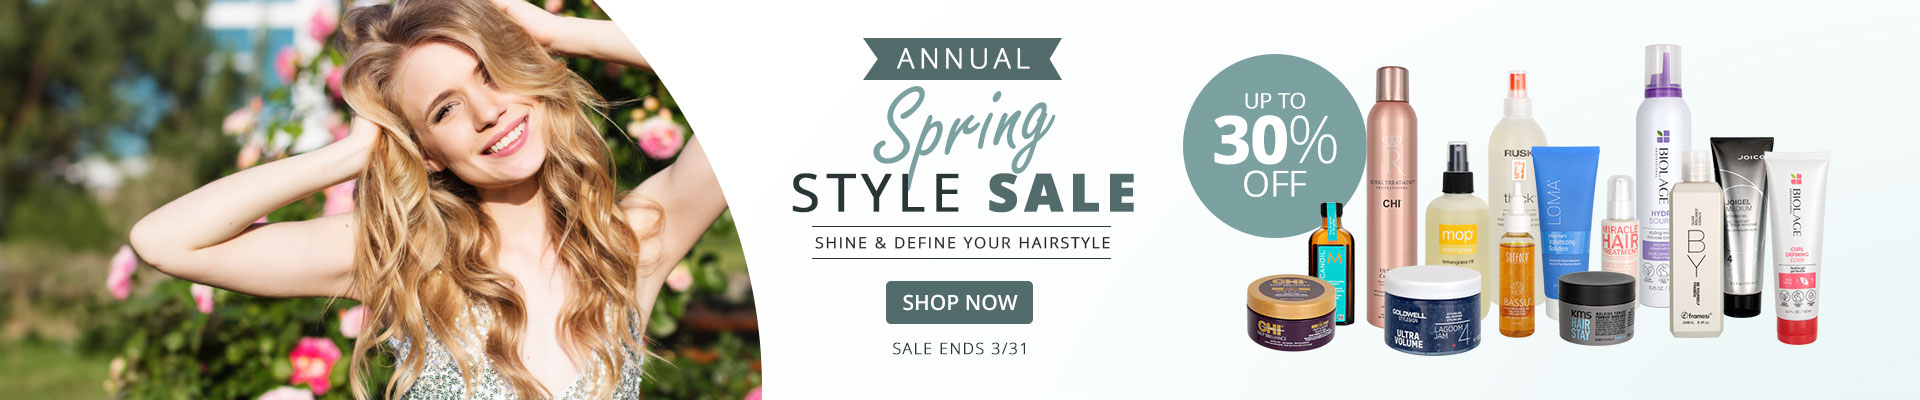 Annual Spring Style Sale | Up to 30% off - Shop Now - Ends 3/31